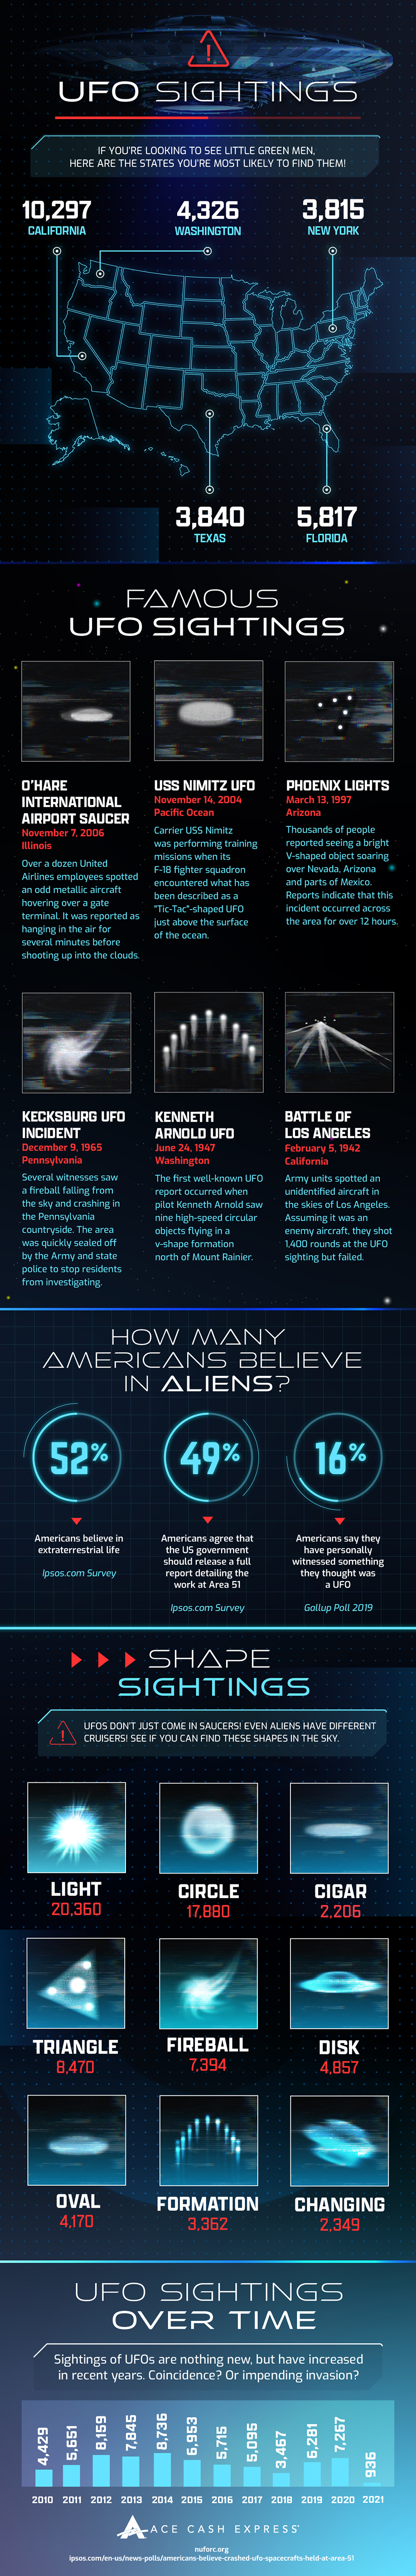 The Most Famous UFO Sightings  Infographic